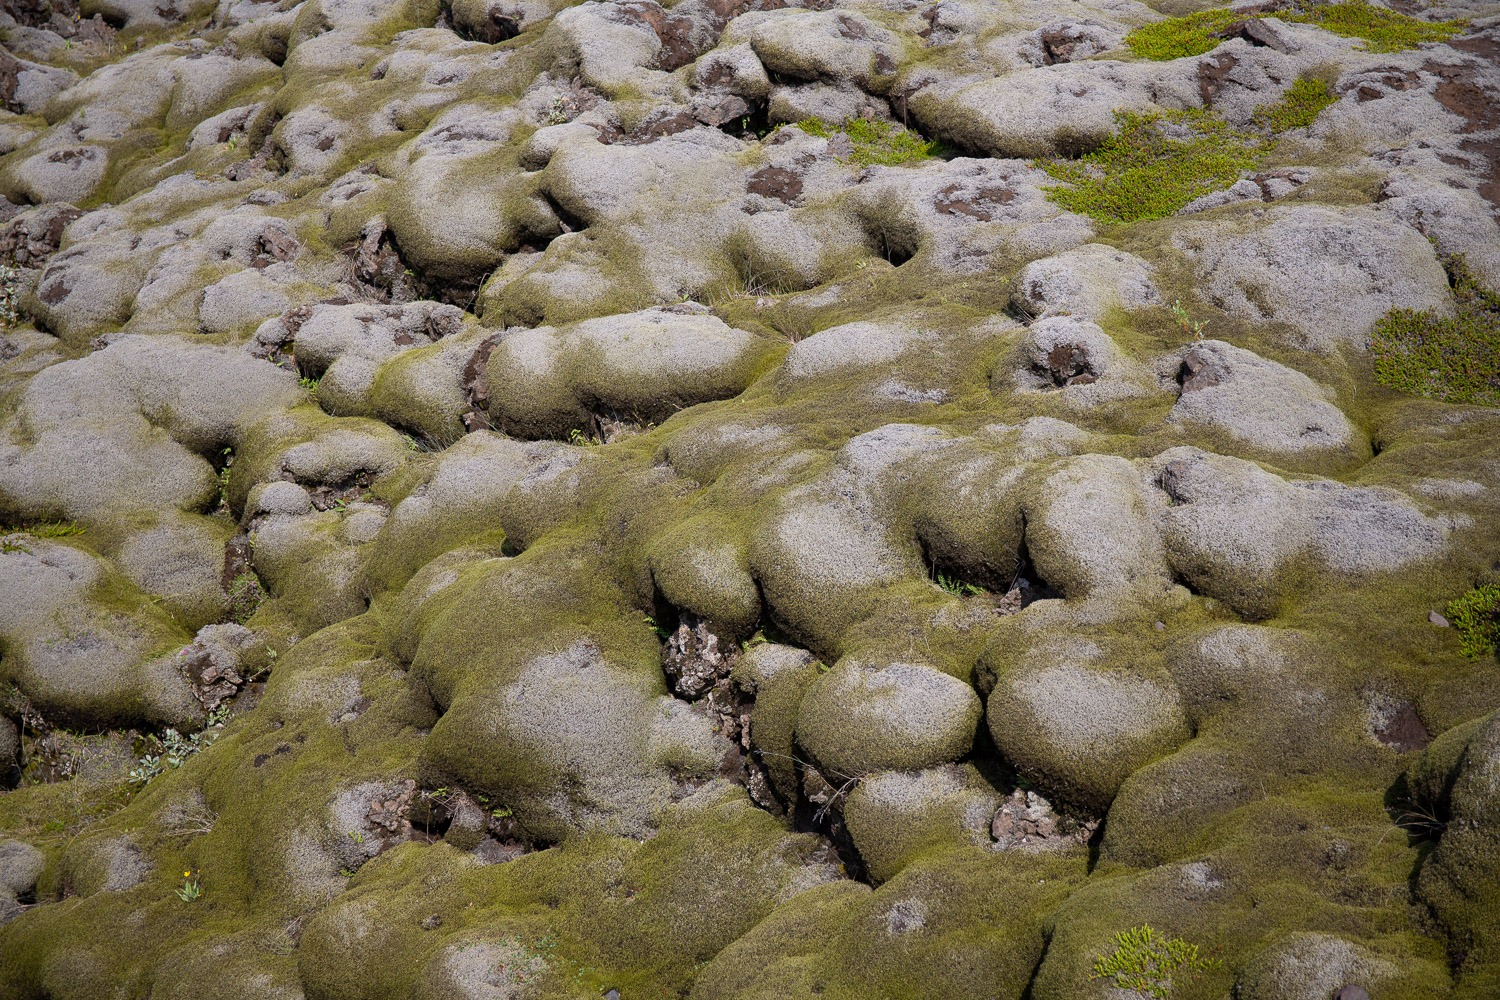 Mossy River Rocks. Moss-covered rocks in a river bed with softly